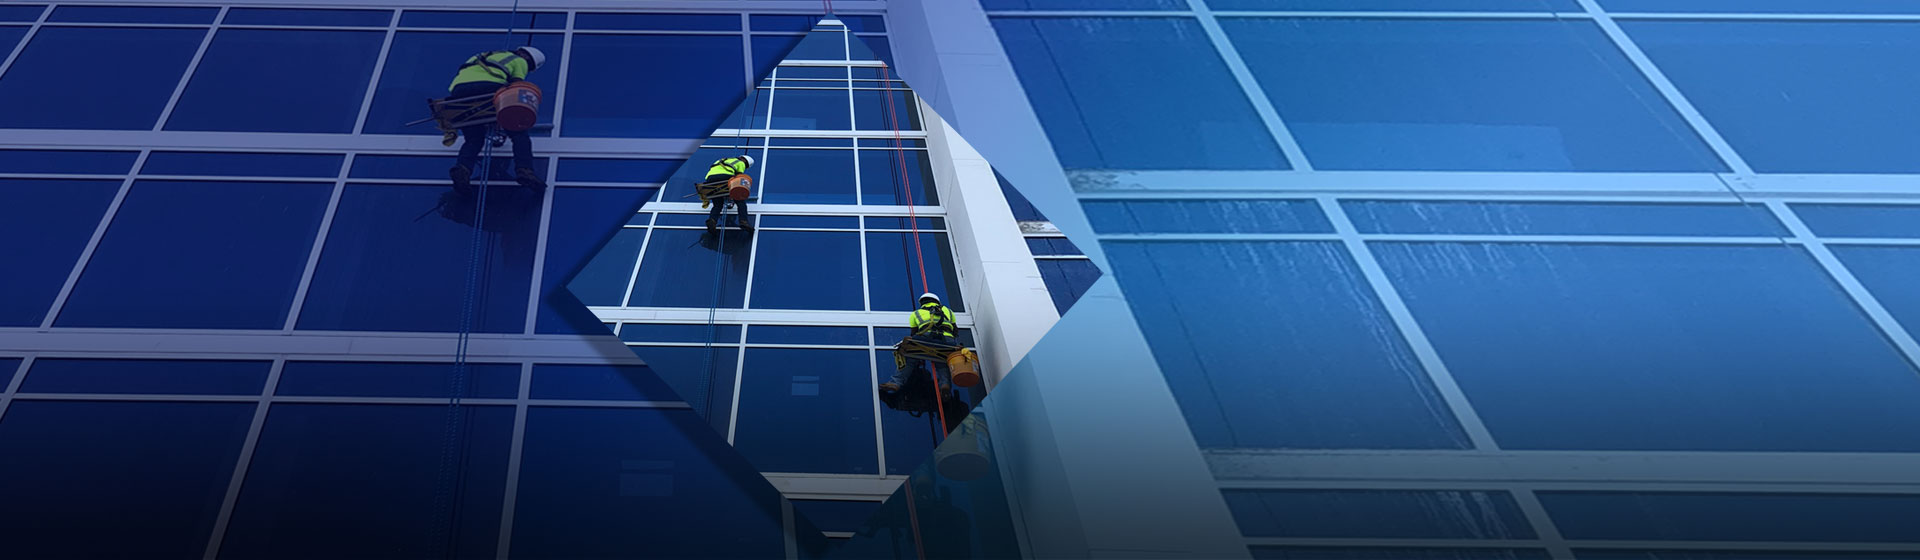 About us | Commercial Cleaning Services, Orlando Window Cleaning Services, Roof Cleaning, Commercial Pressure Washing, Orlando Construction Clean-up, Central Florida Building Maintenance